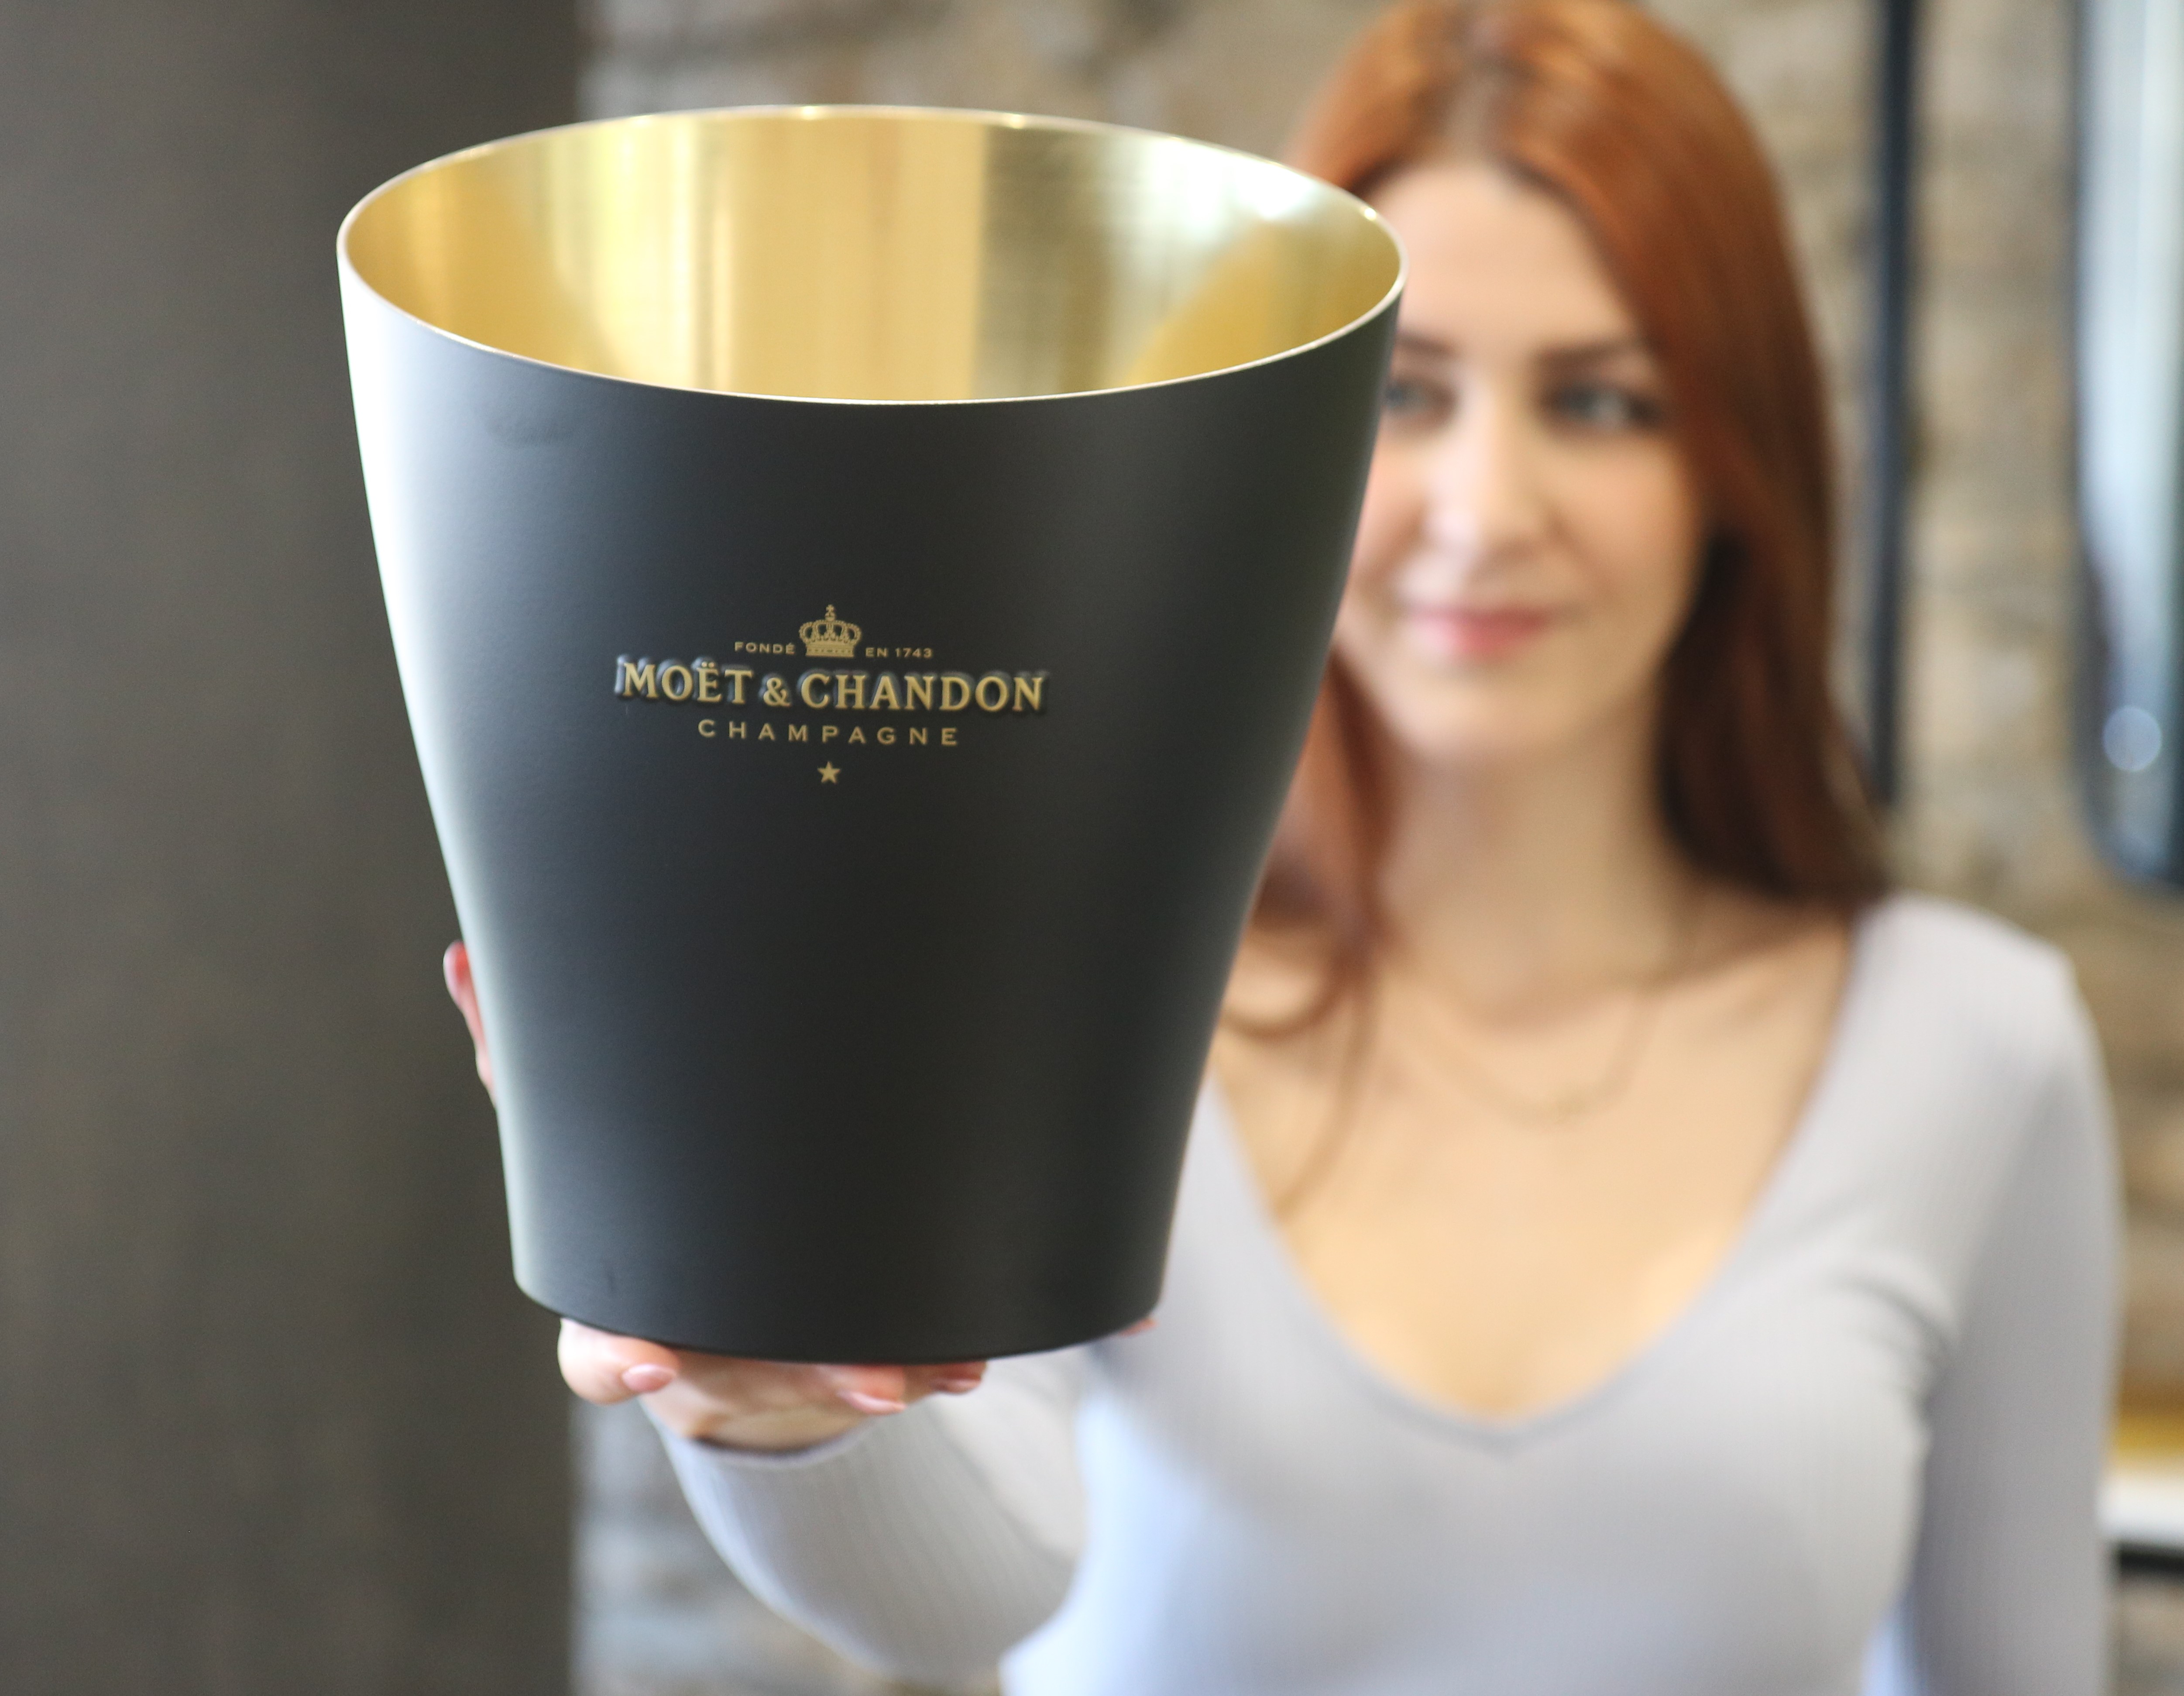 mo_t_chandon_champagne_bucket_in_gold_and_black_color_2020_design_champagneclub_13.JPG